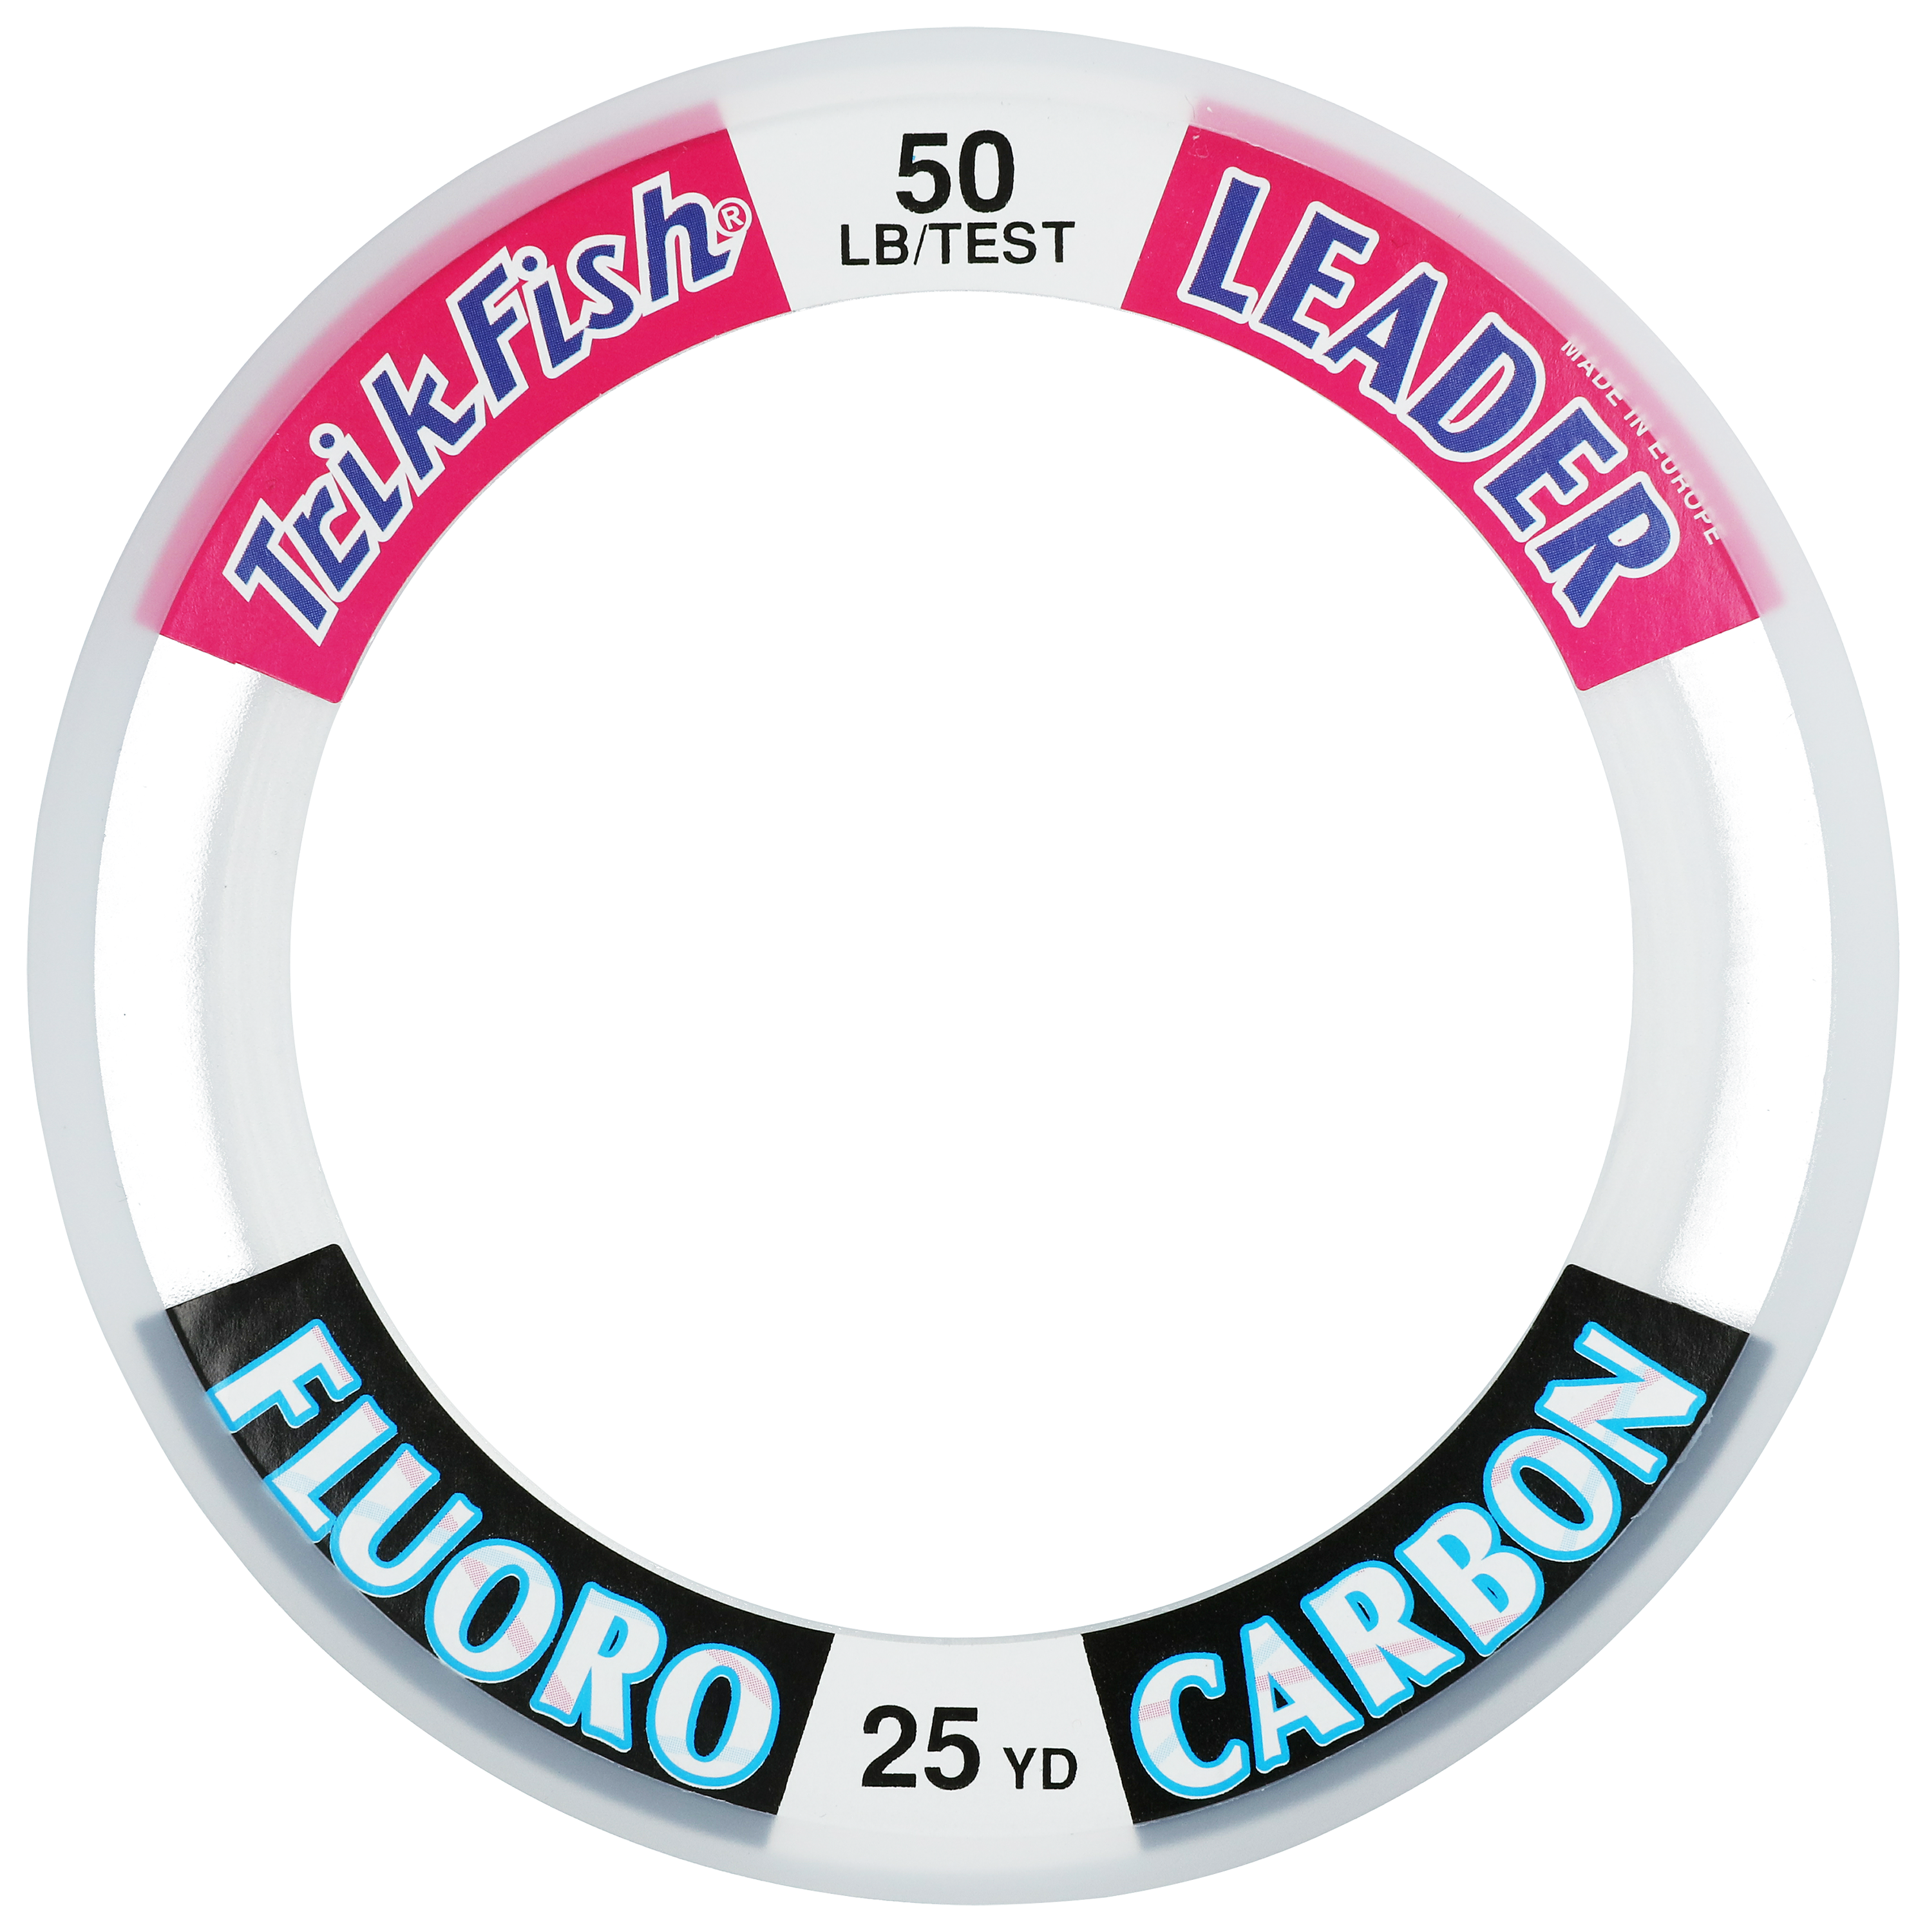  Ande FPW-50-20 Fluorocarbon Leader Material, 50-Yard